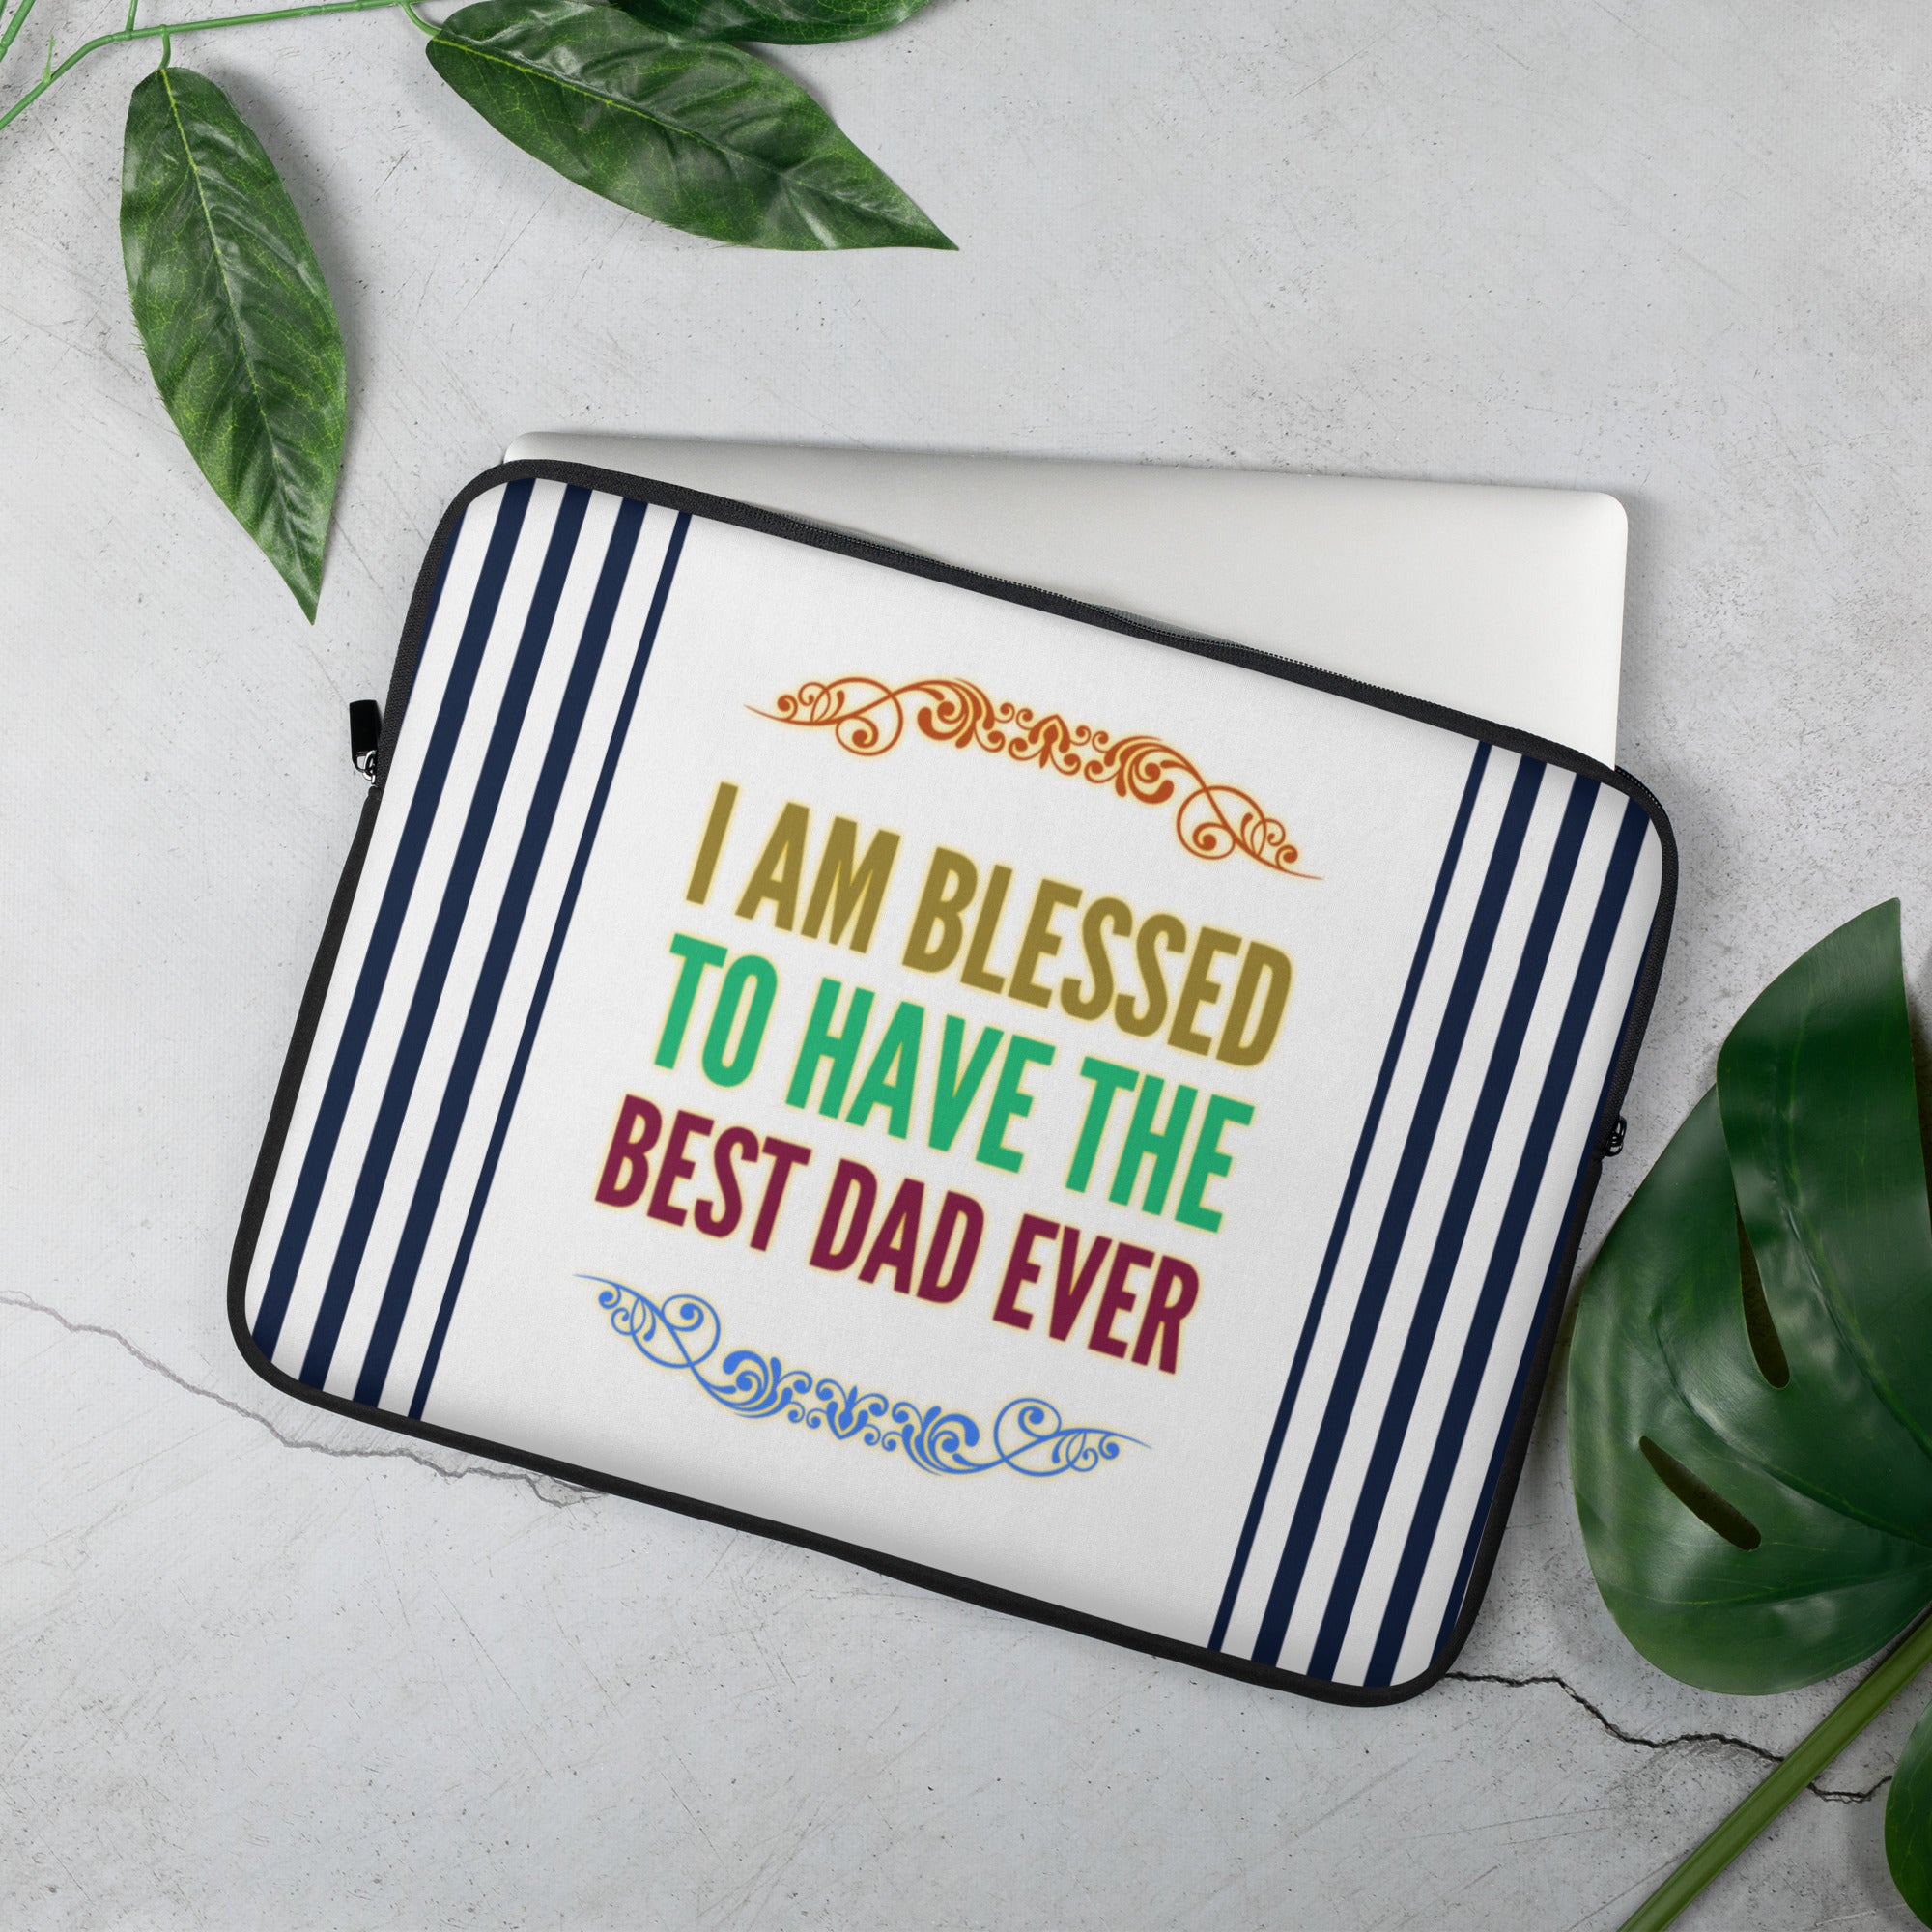 GloWell Designs - Laptop Sleeve - Affirmation Quote - Gift - Best Dad Ever - GloWell Designs